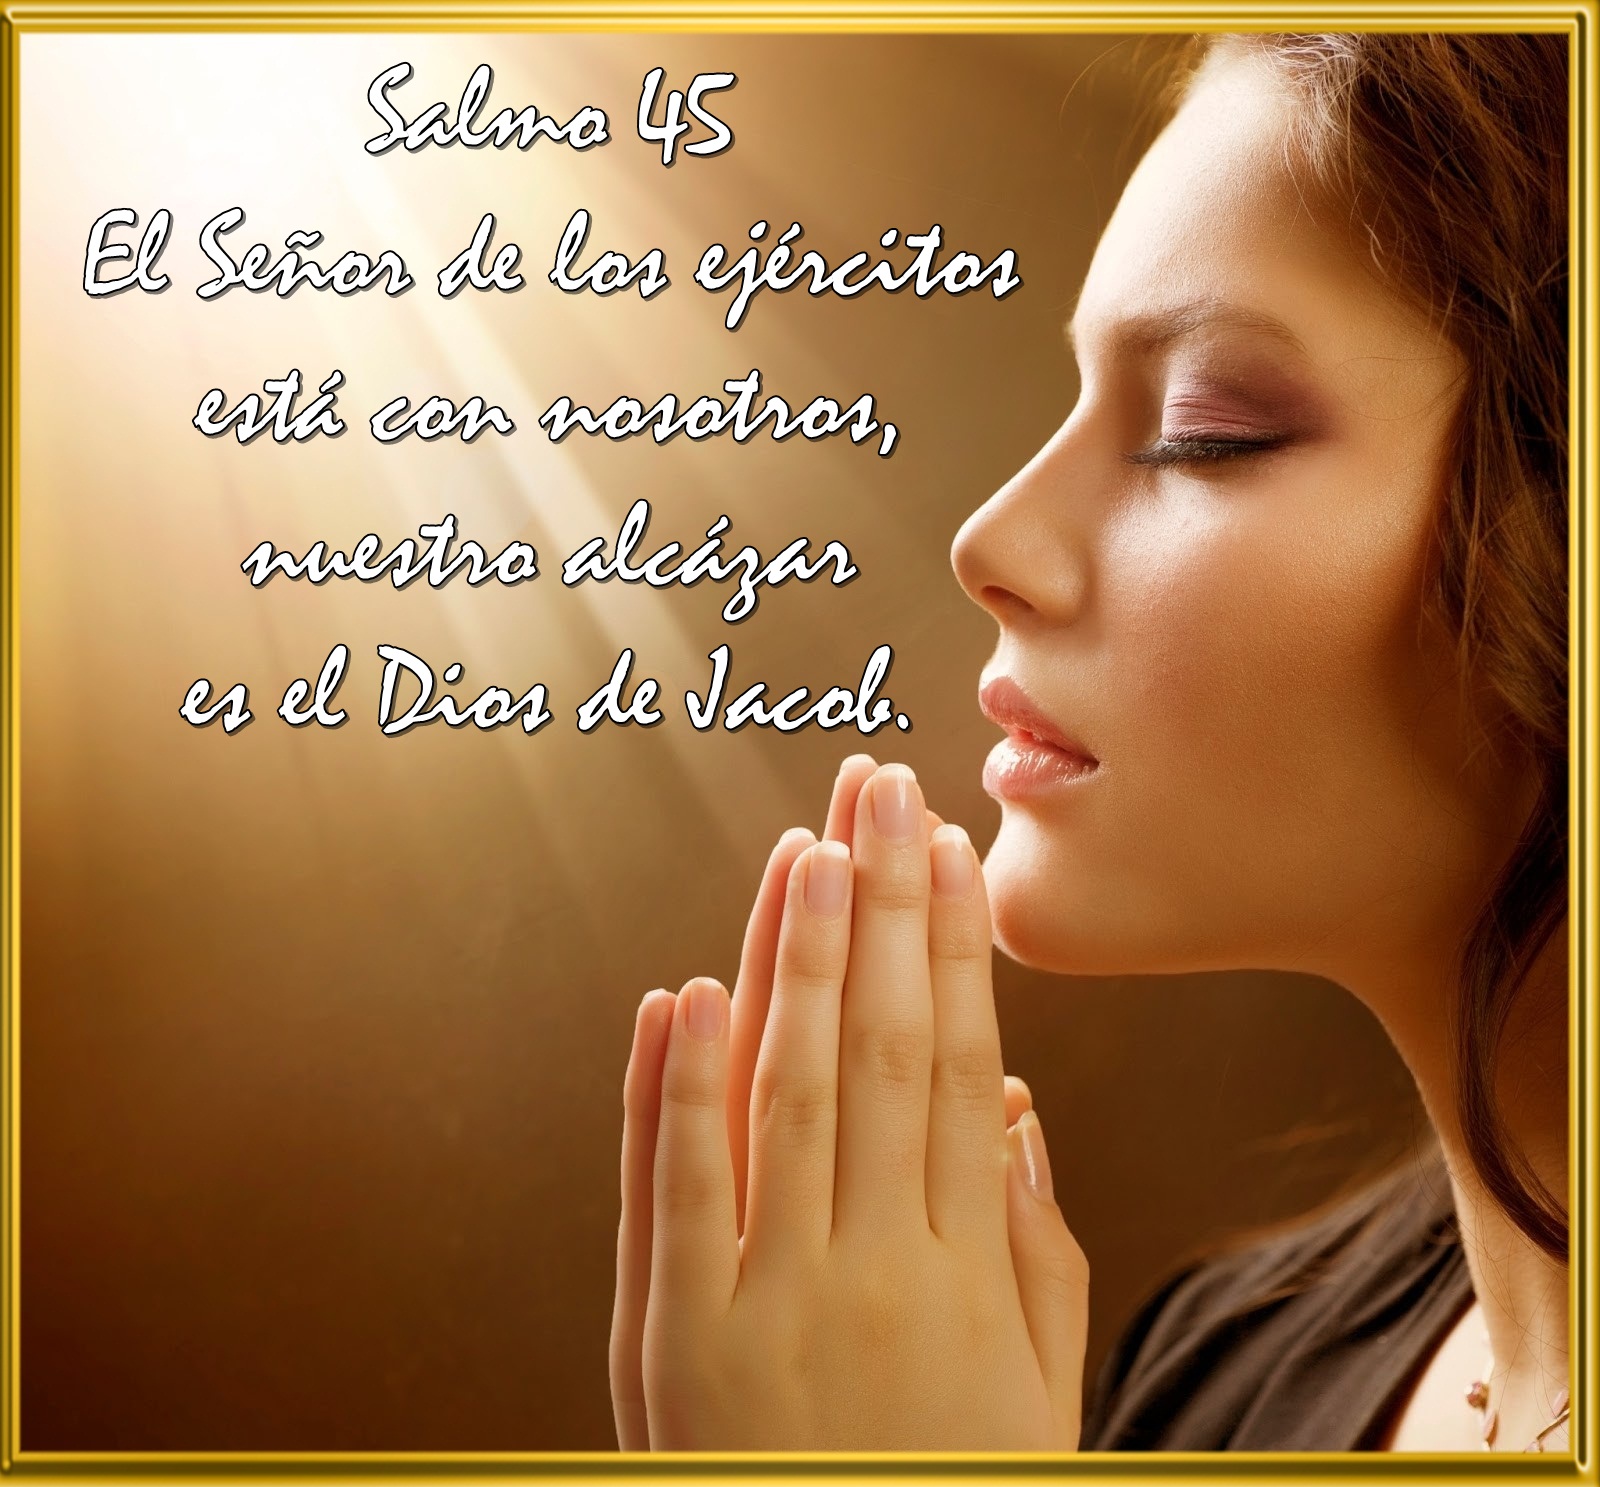 Image result for salmos 45